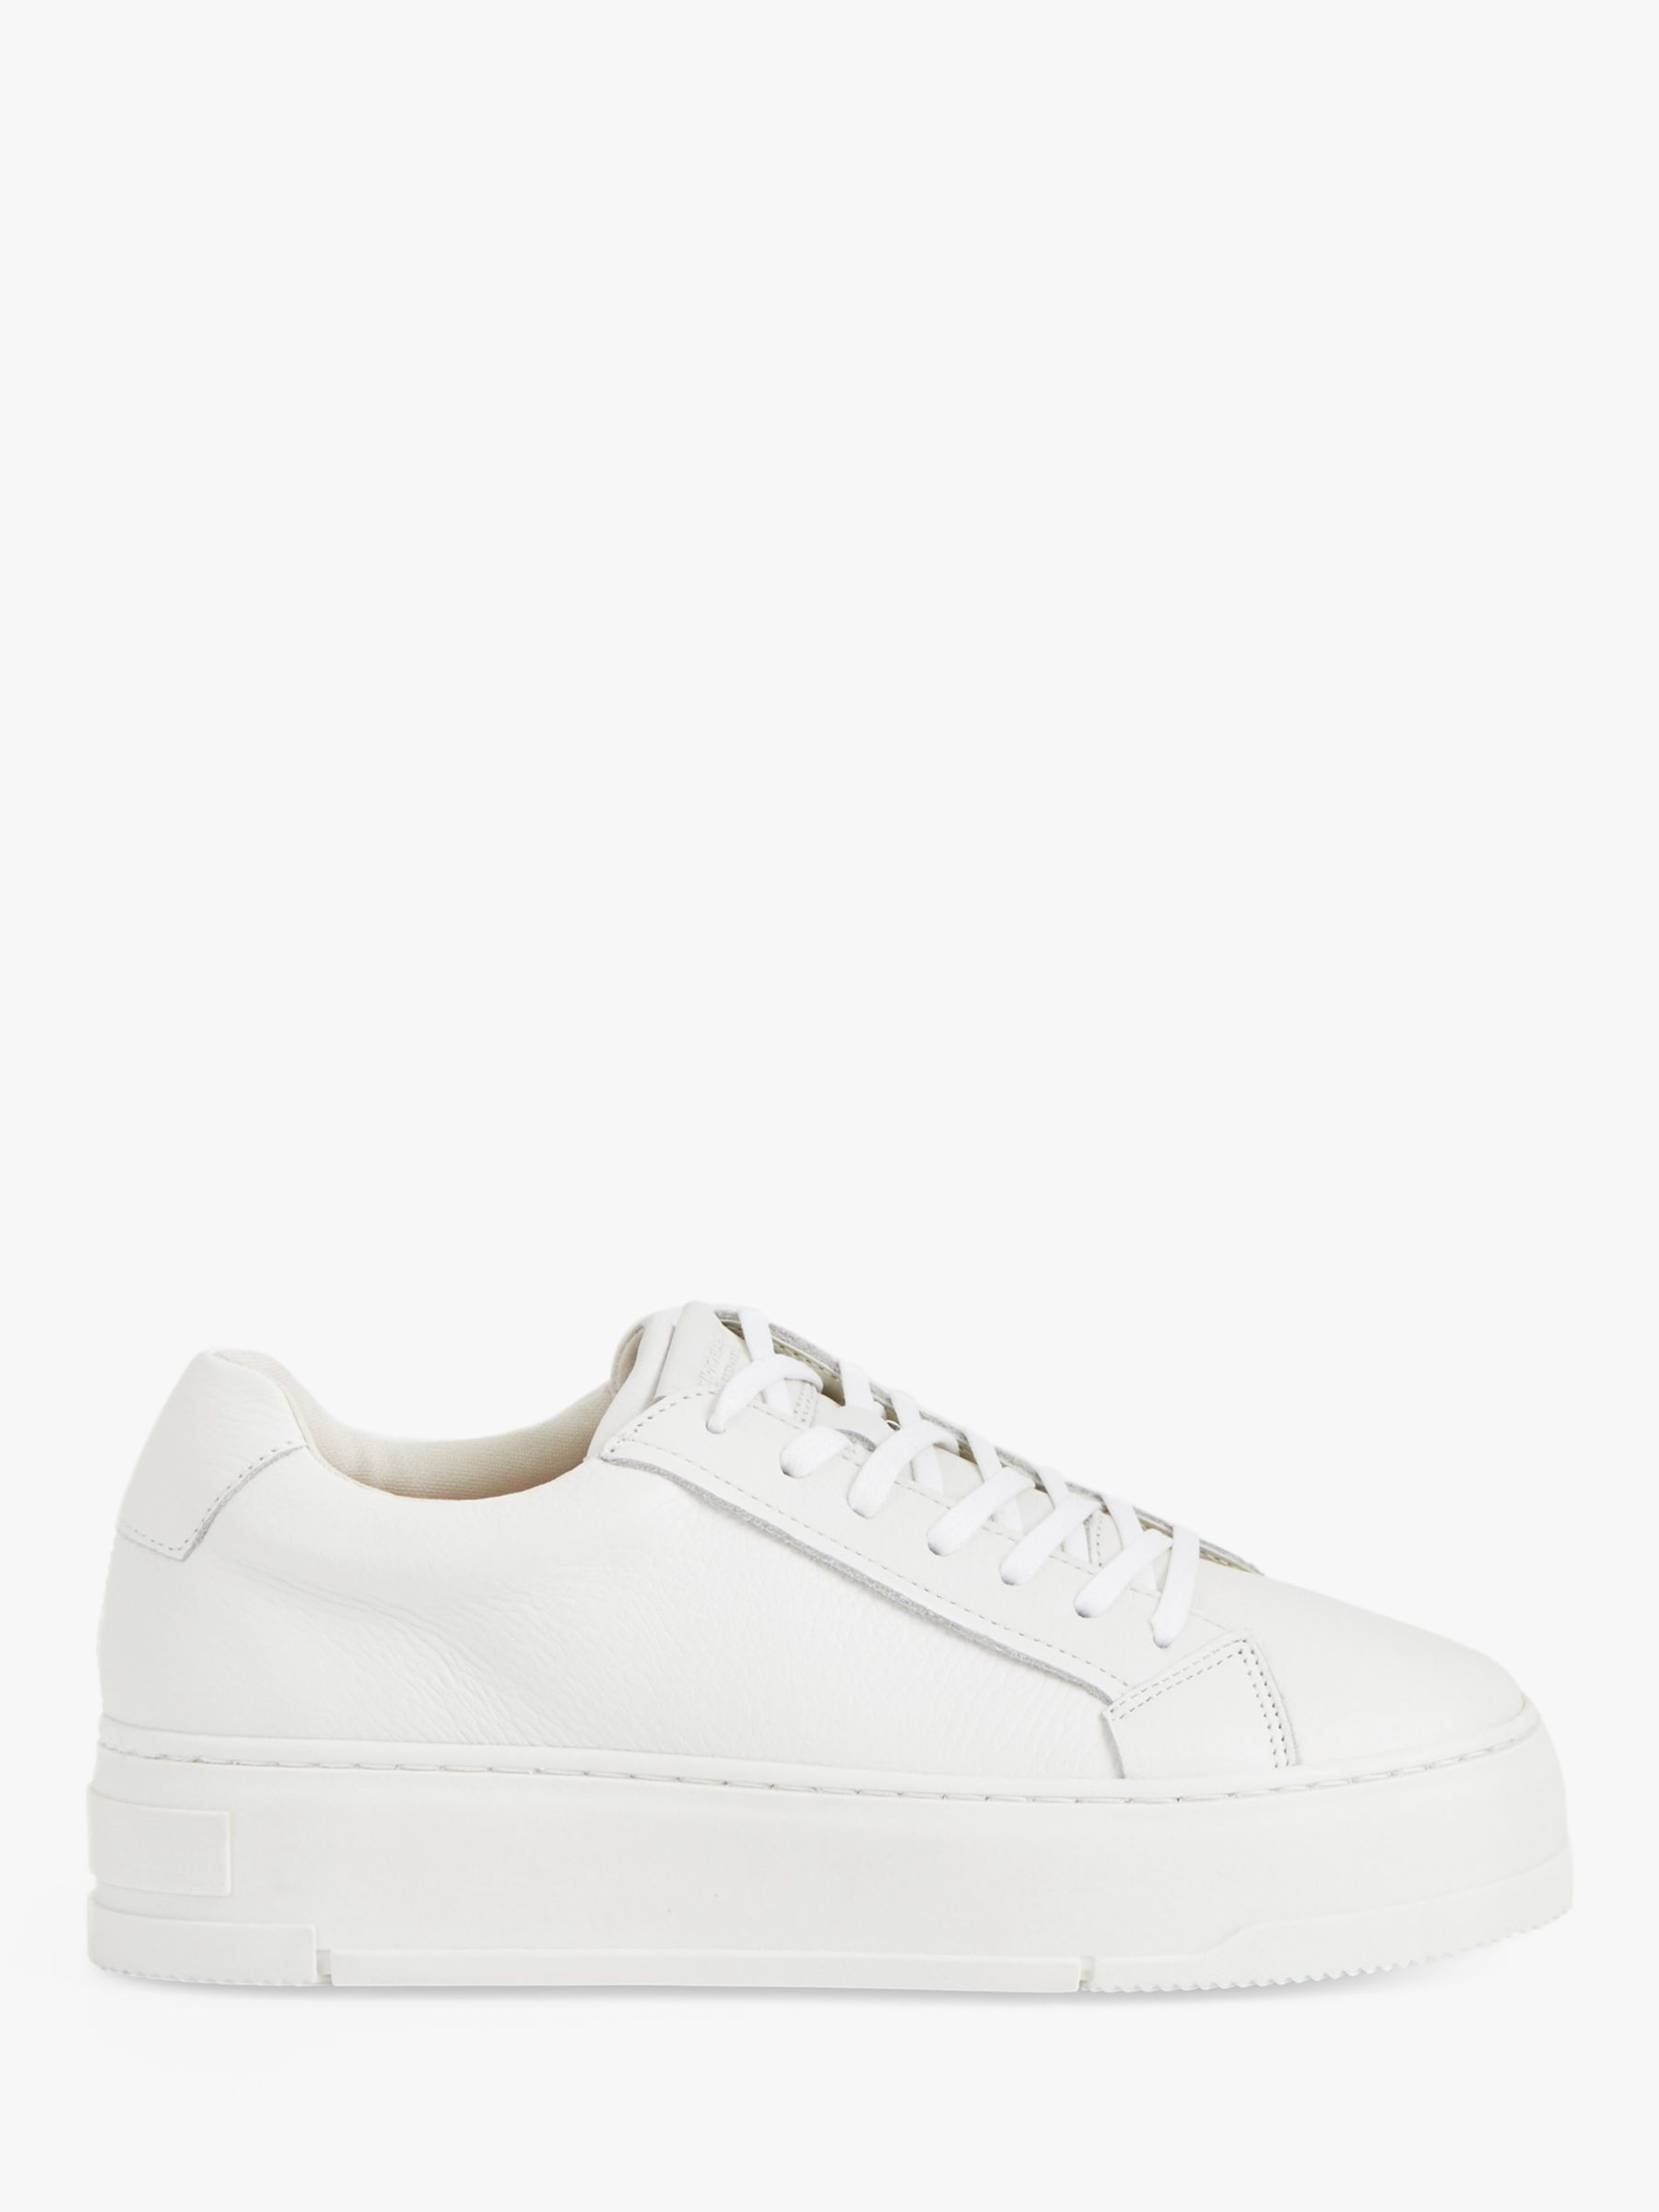 Billy her Gøre klart Vagabond Shoemakers Judy Leather Trainers, White at John Lewis & Partners